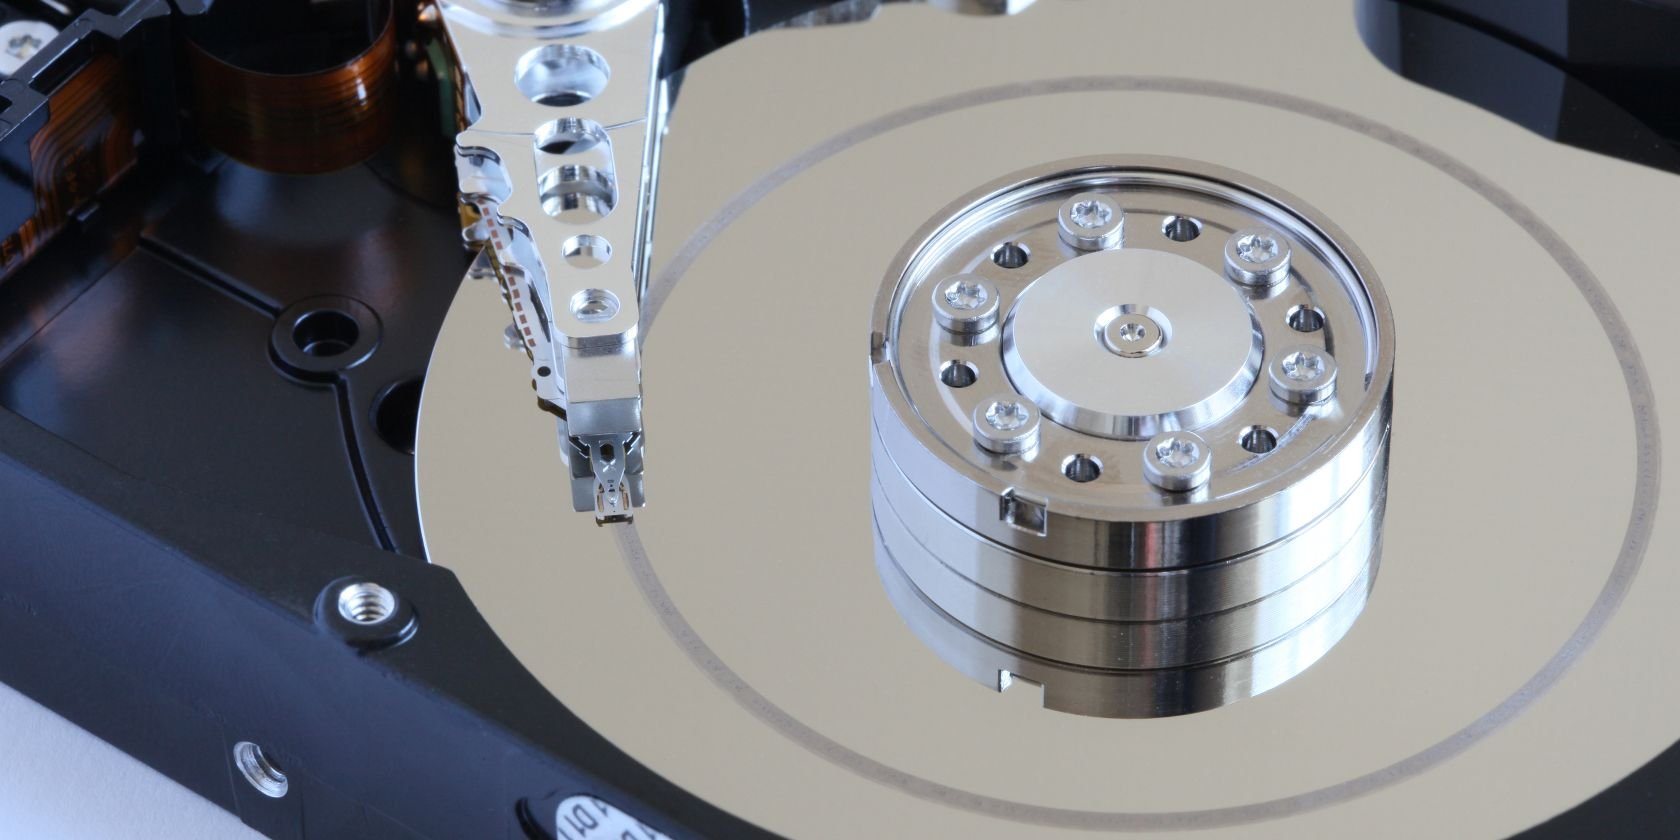 What Is Data Recovery And How Does It Work?